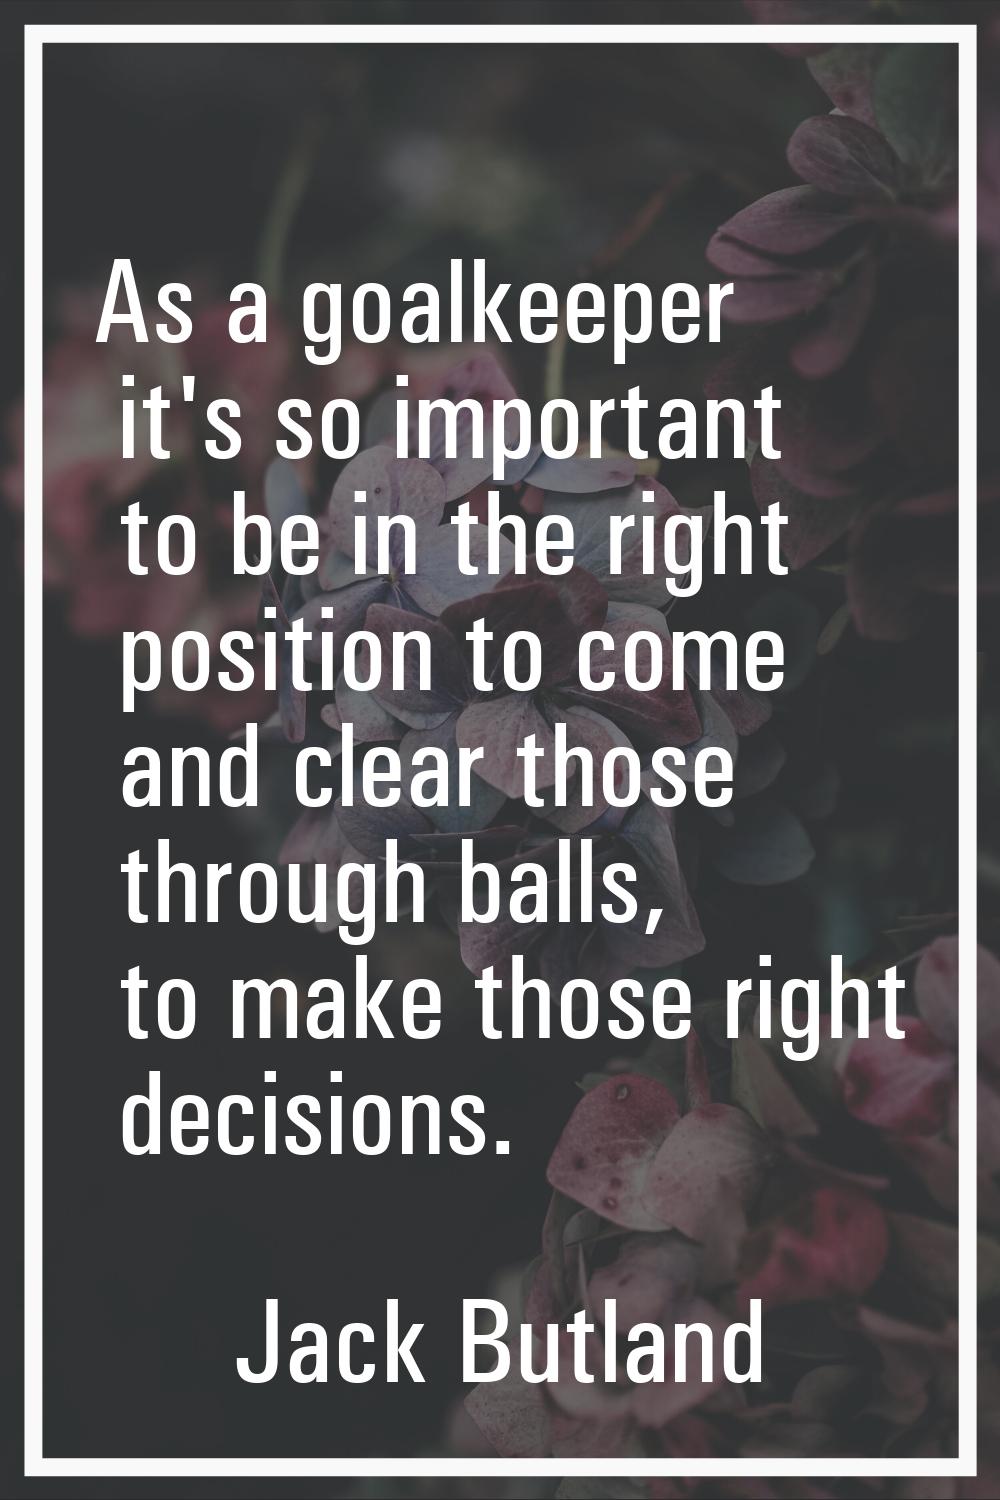 As a goalkeeper it's so important to be in the right position to come and clear those through balls